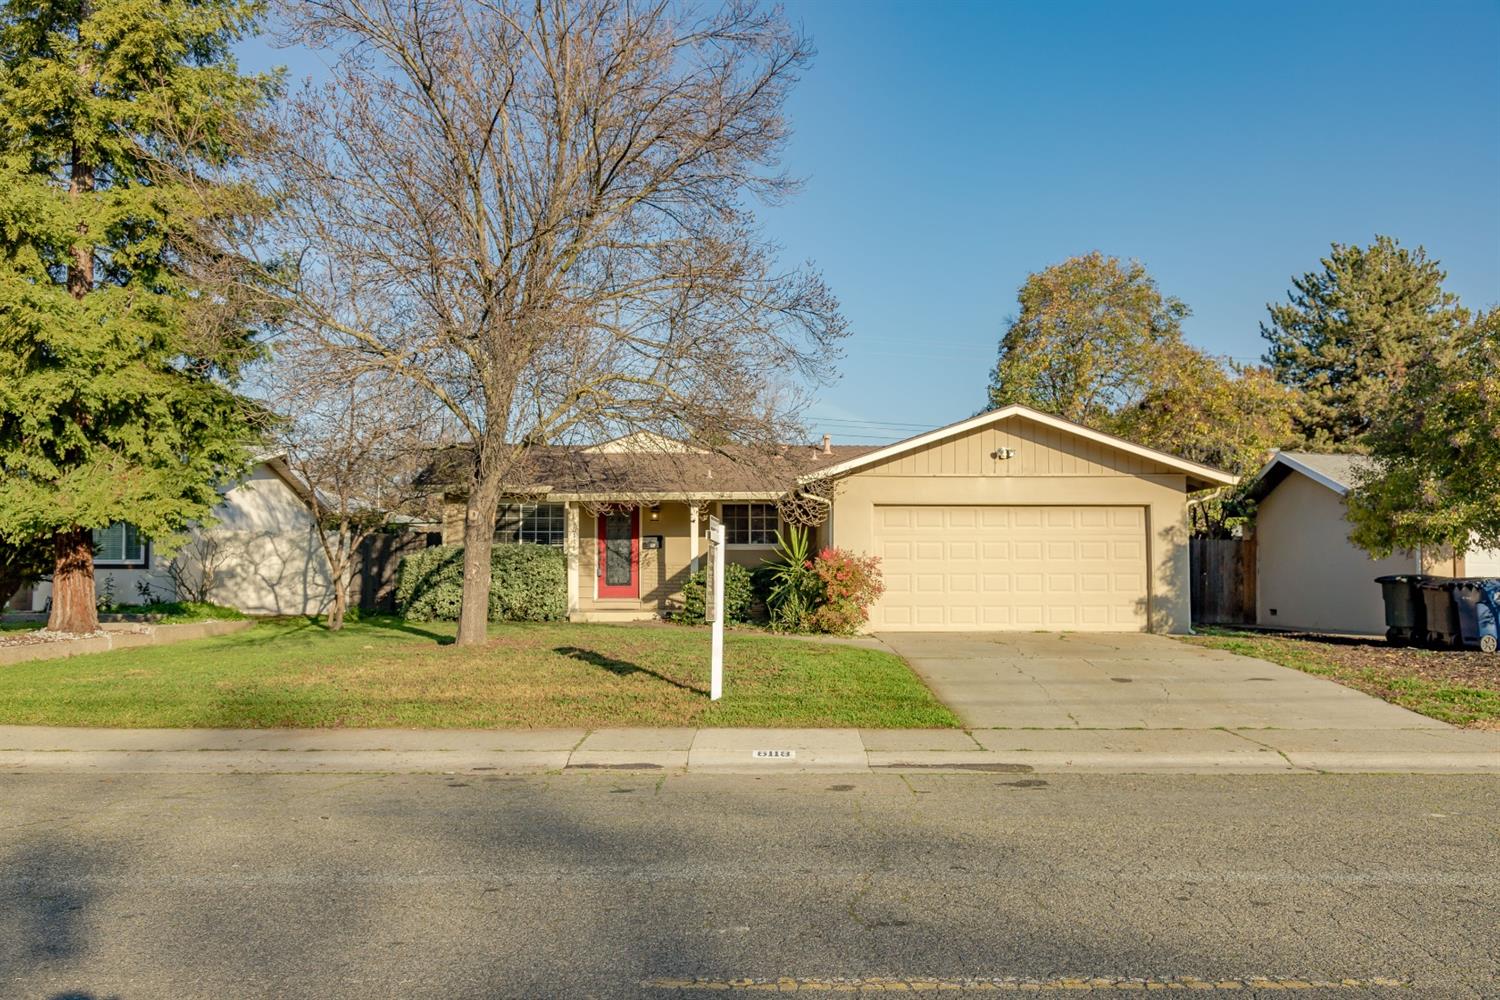 Stunning 3 bedroom, 2 bathroom, Citrus Heights home is conveniently located near shopping, restauran